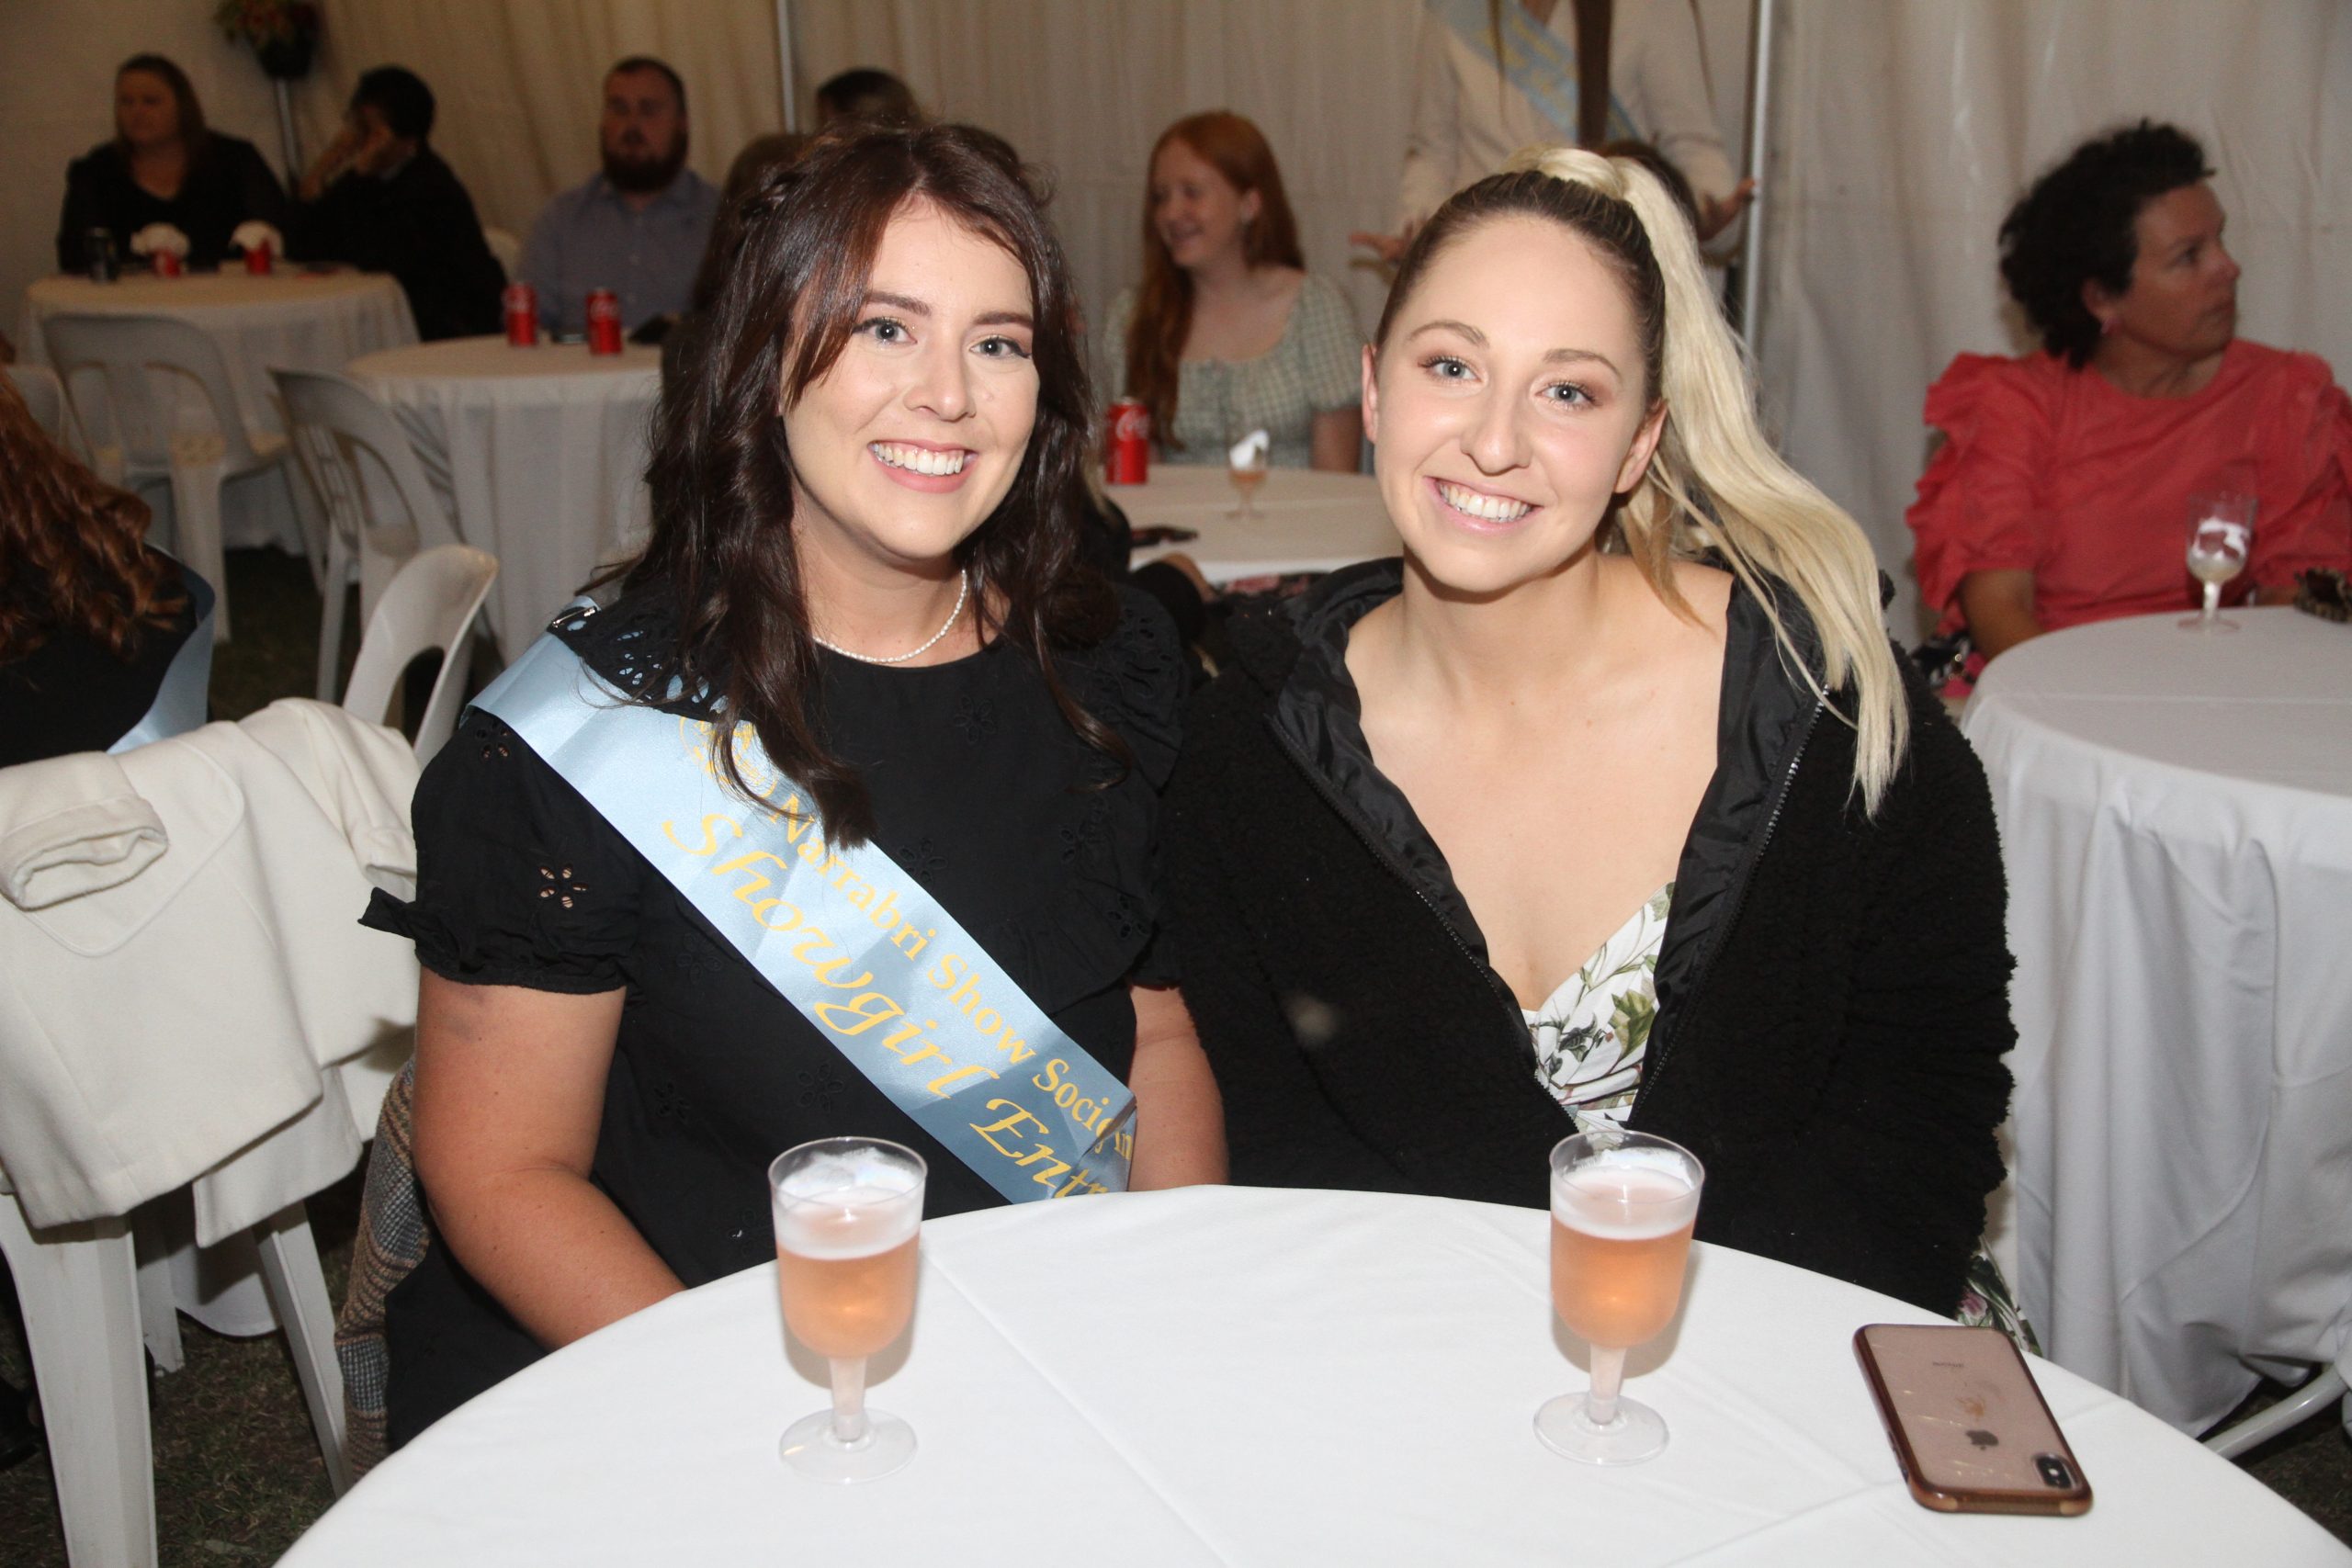 Narrabri Showgirl competition entrants interviewed at cocktail evening | PHOTOS